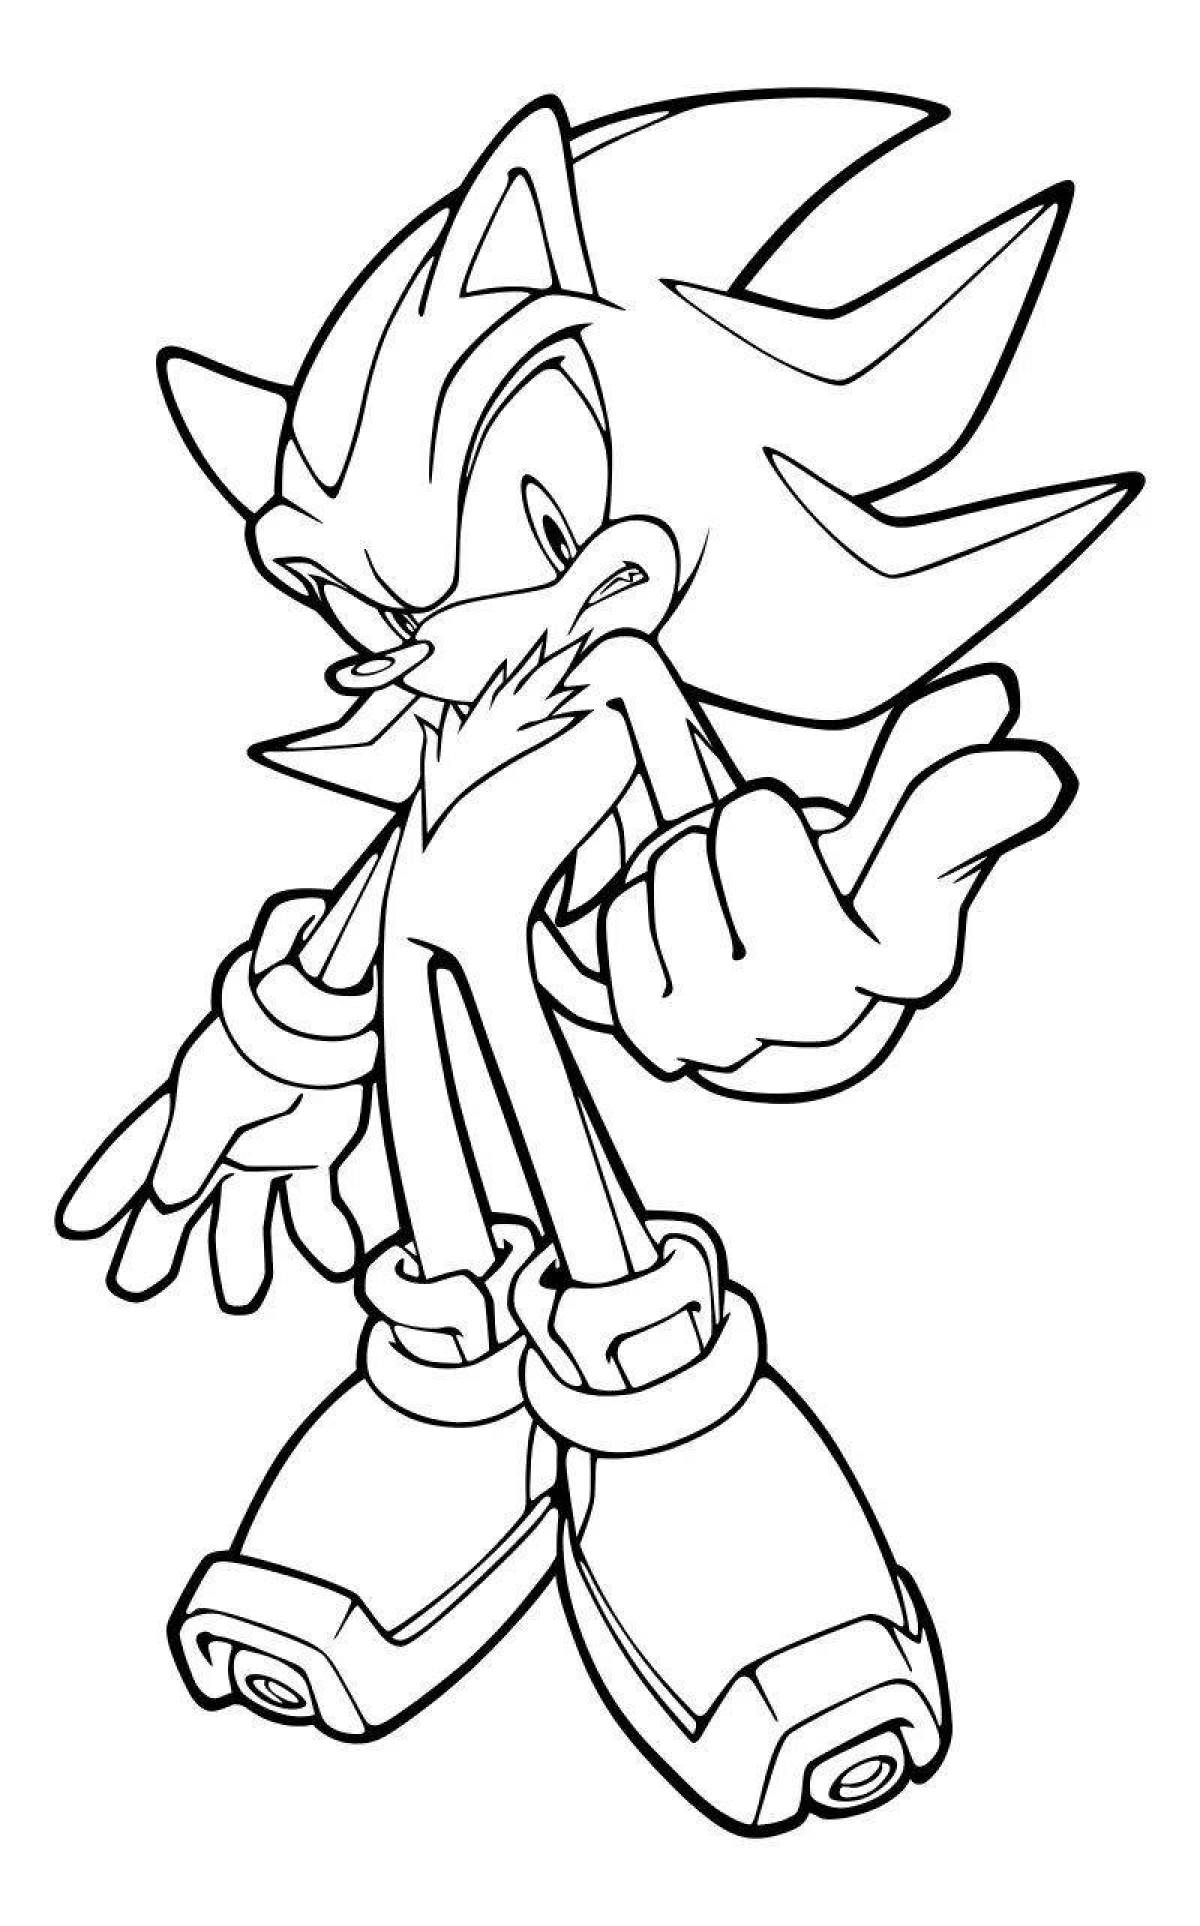 Sonic the hedgehog coloring page